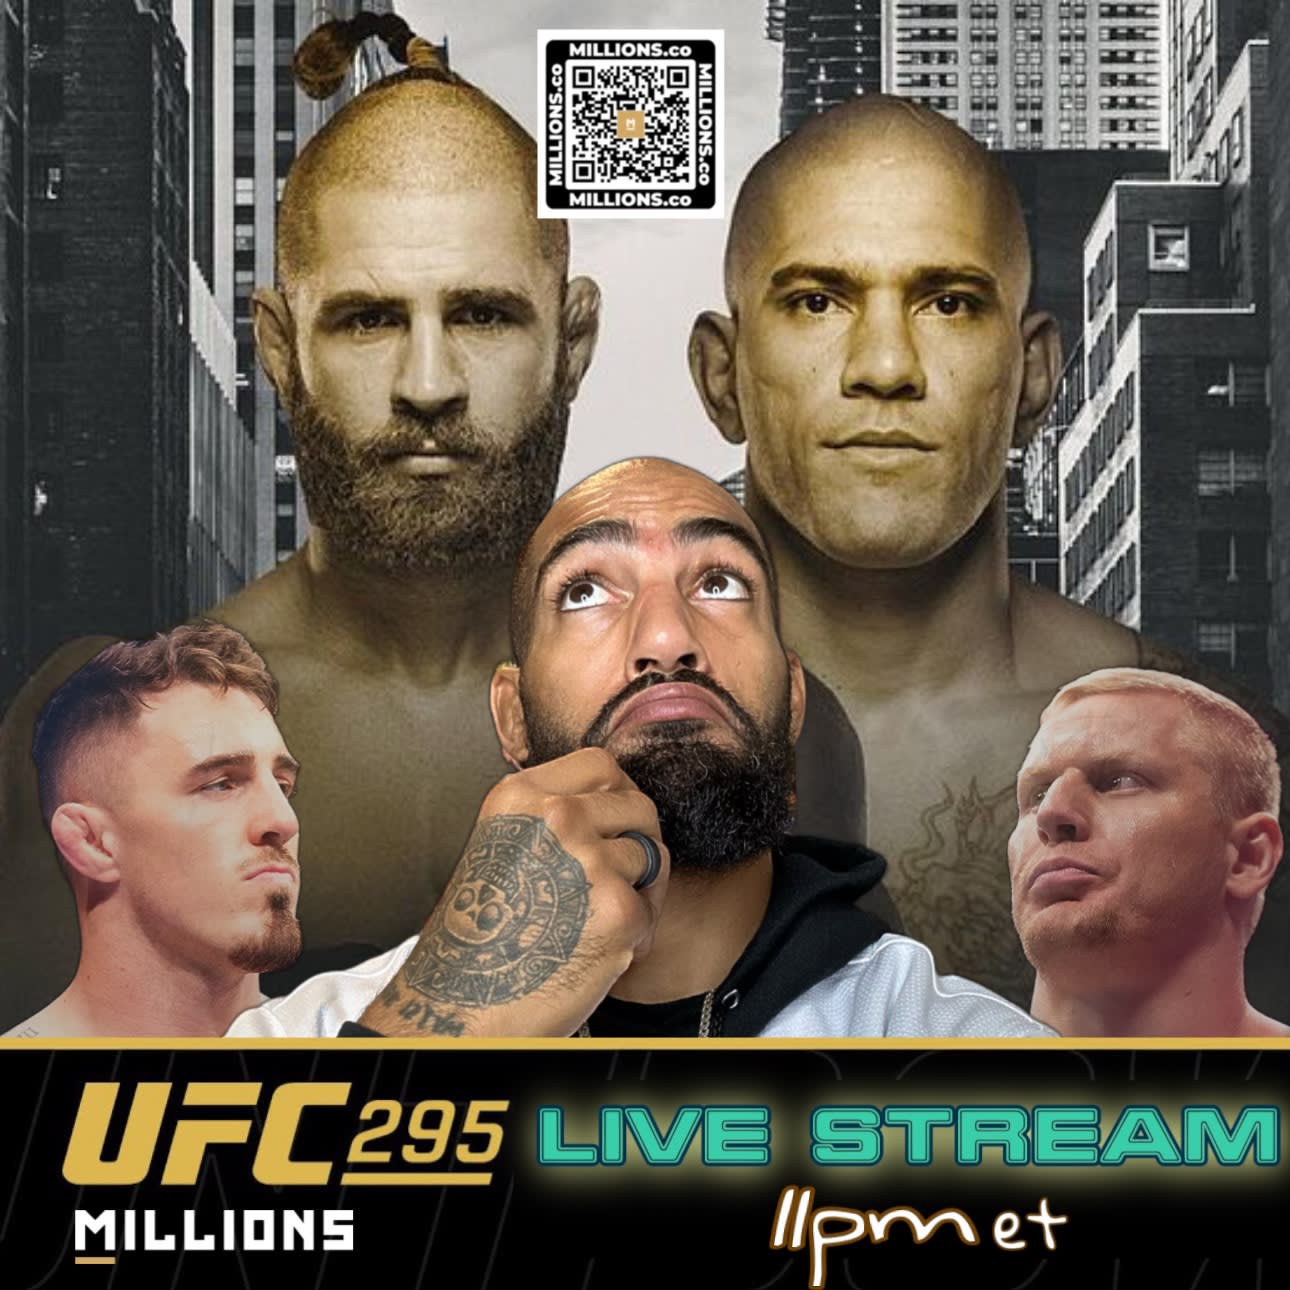 UFC LIVE WatchParty. Event streamed separately! 

November 11th, 2023, Only on MILLIONS.co